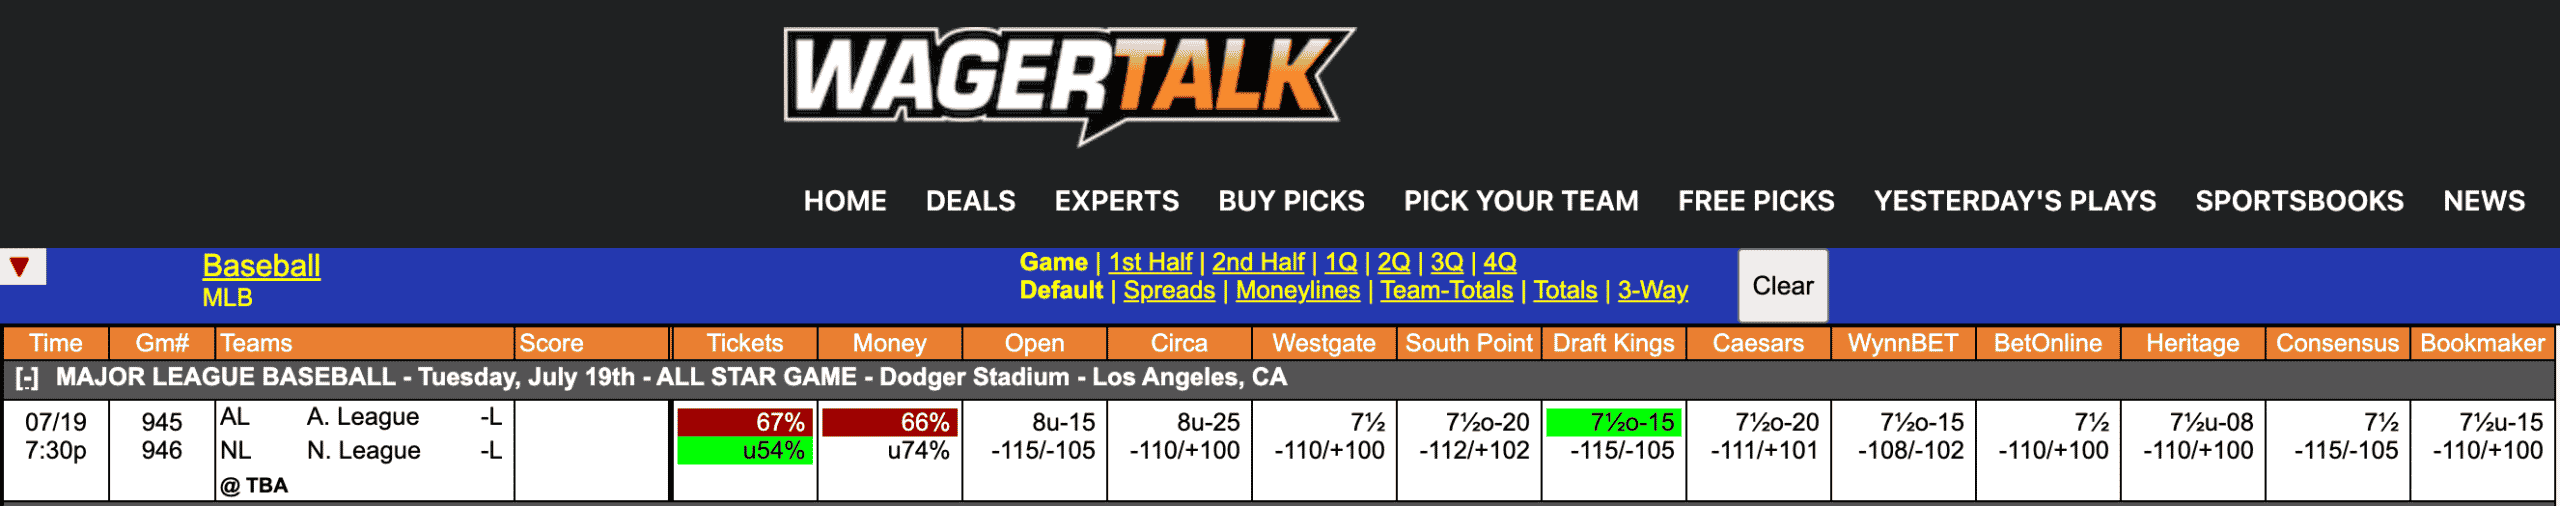 All-Star Game Odds